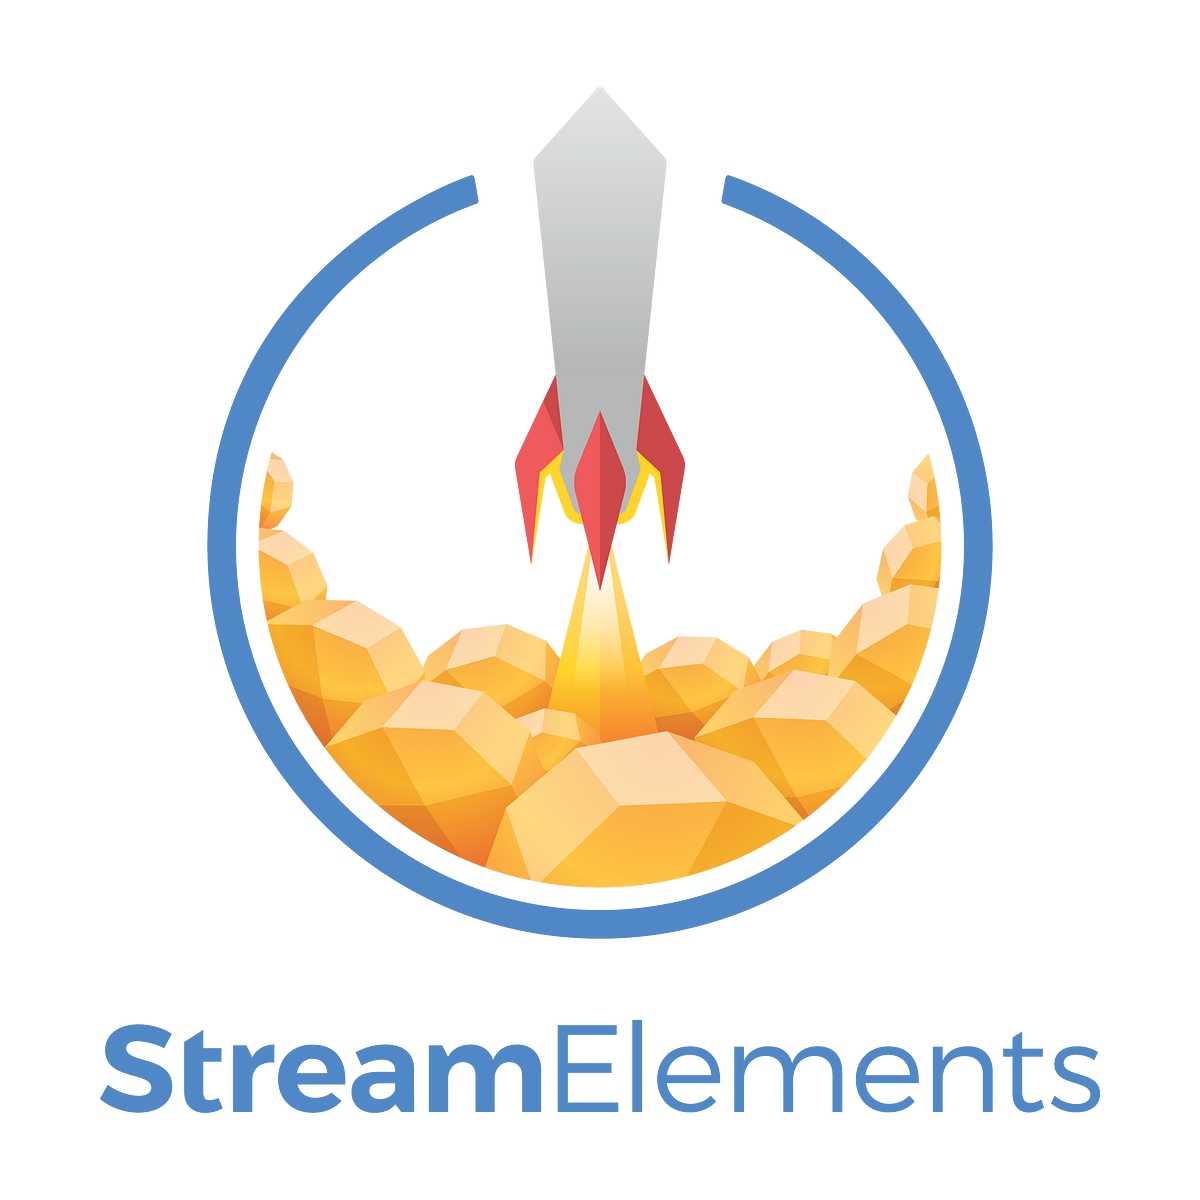 Trending stories published on StreamElements - Legendary Content Creation  Tools and Services